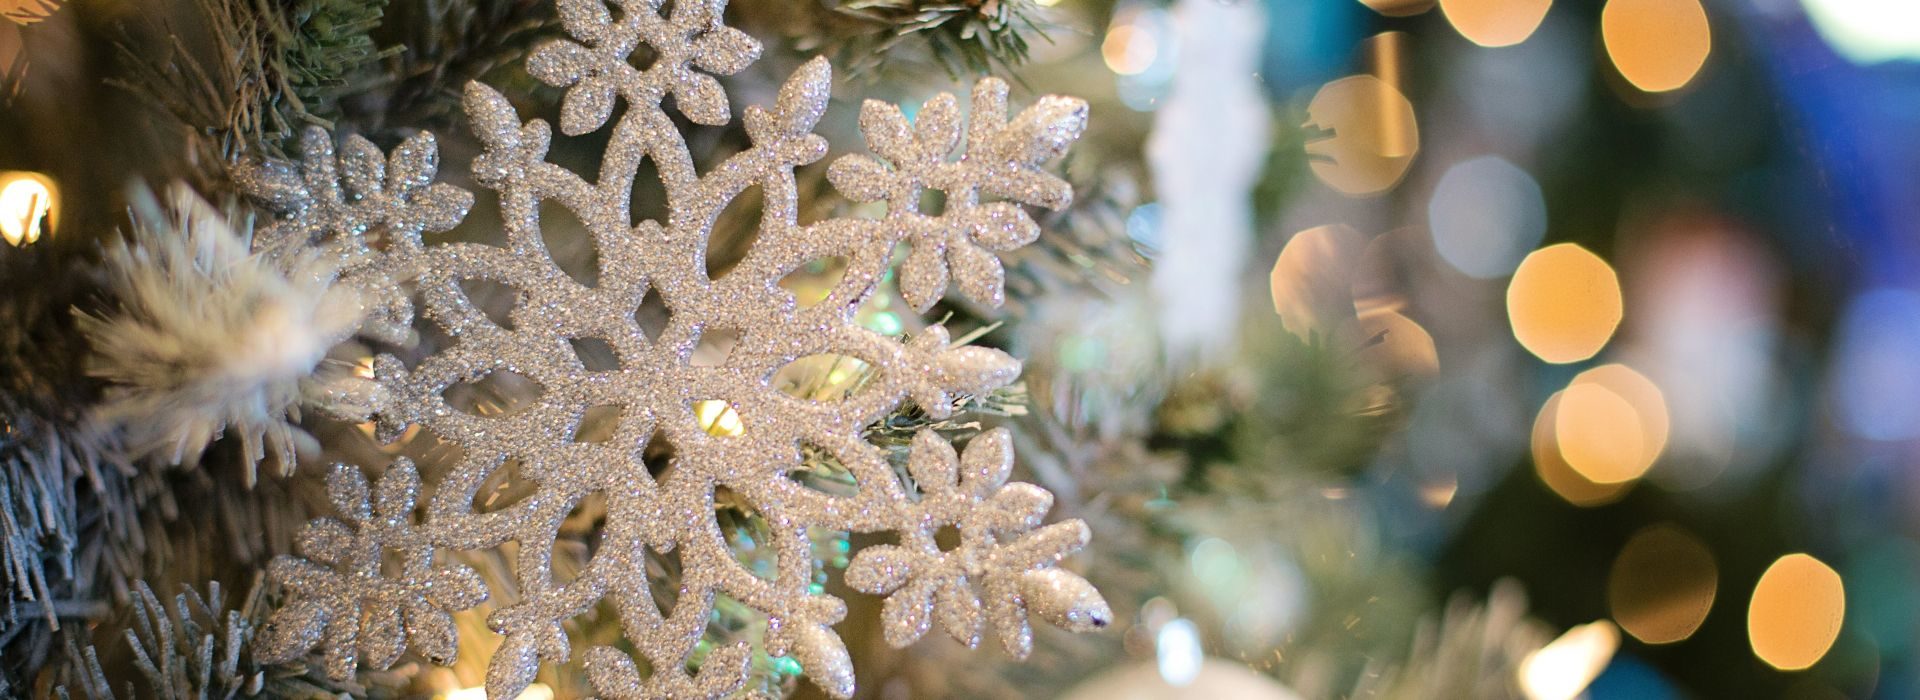 A silver glittered snowflake ornament on a Christmas tree